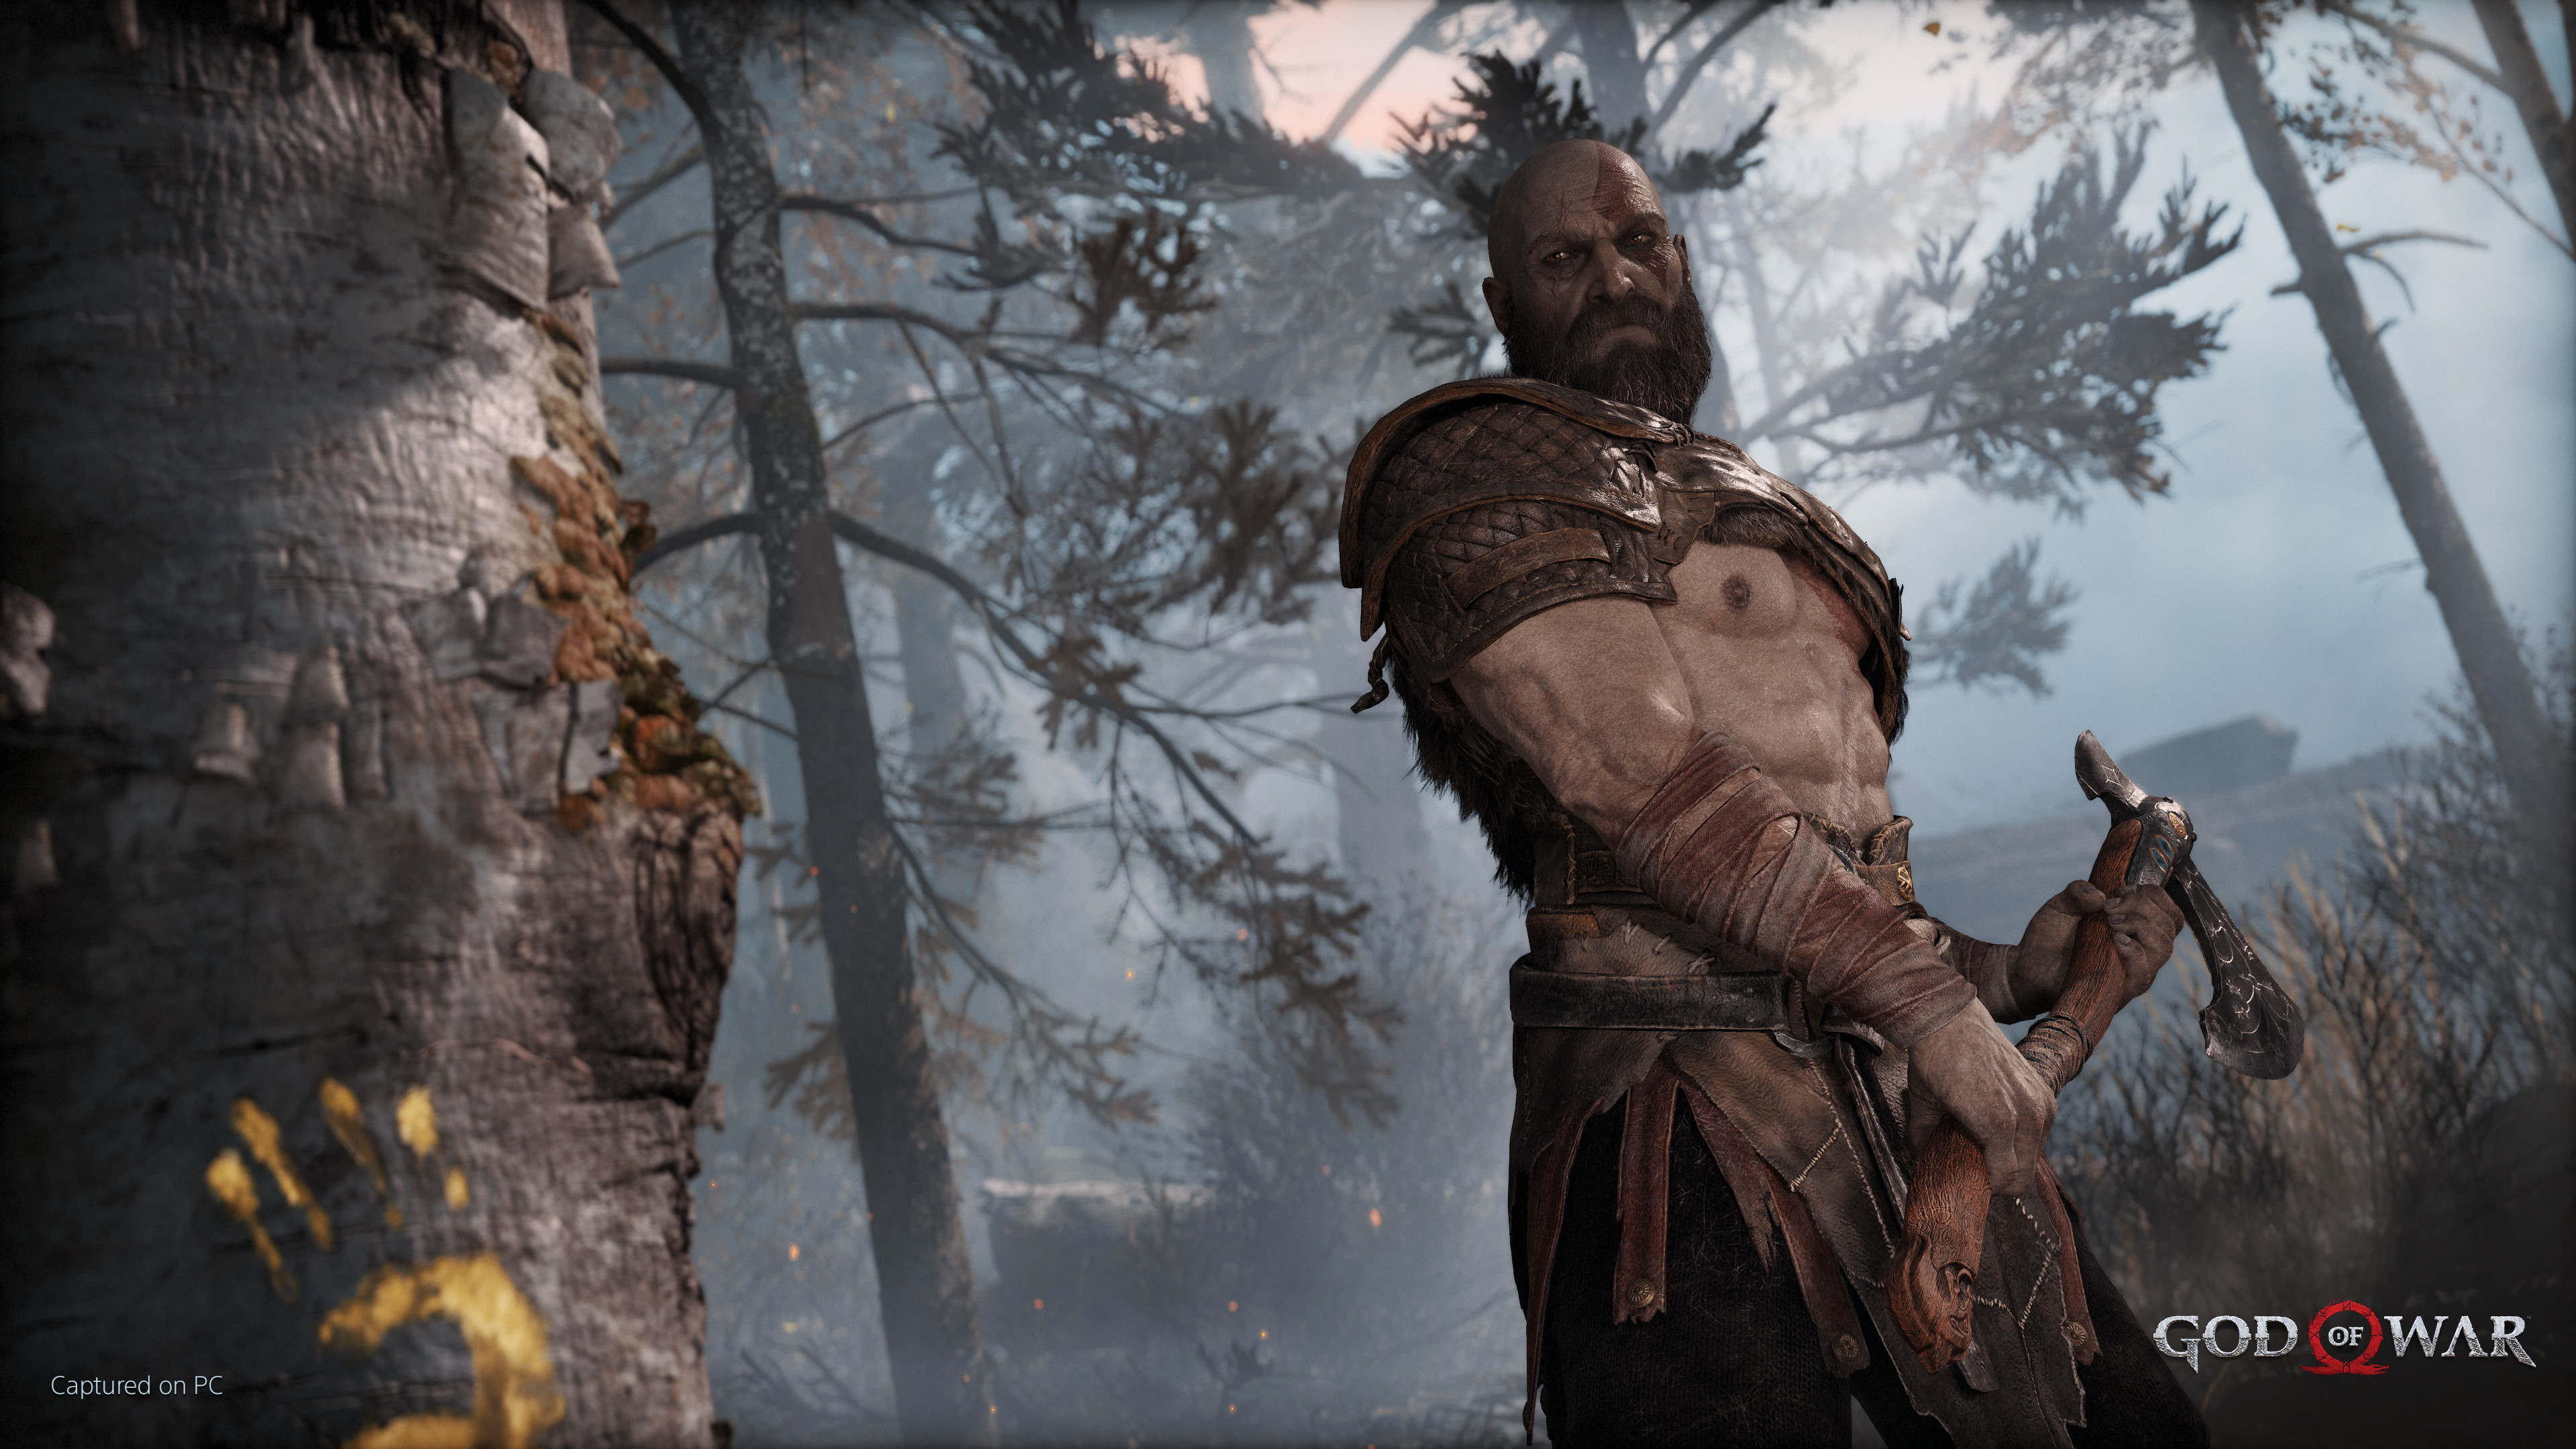 God of War (2018) is coming to PC in January – Destructoid